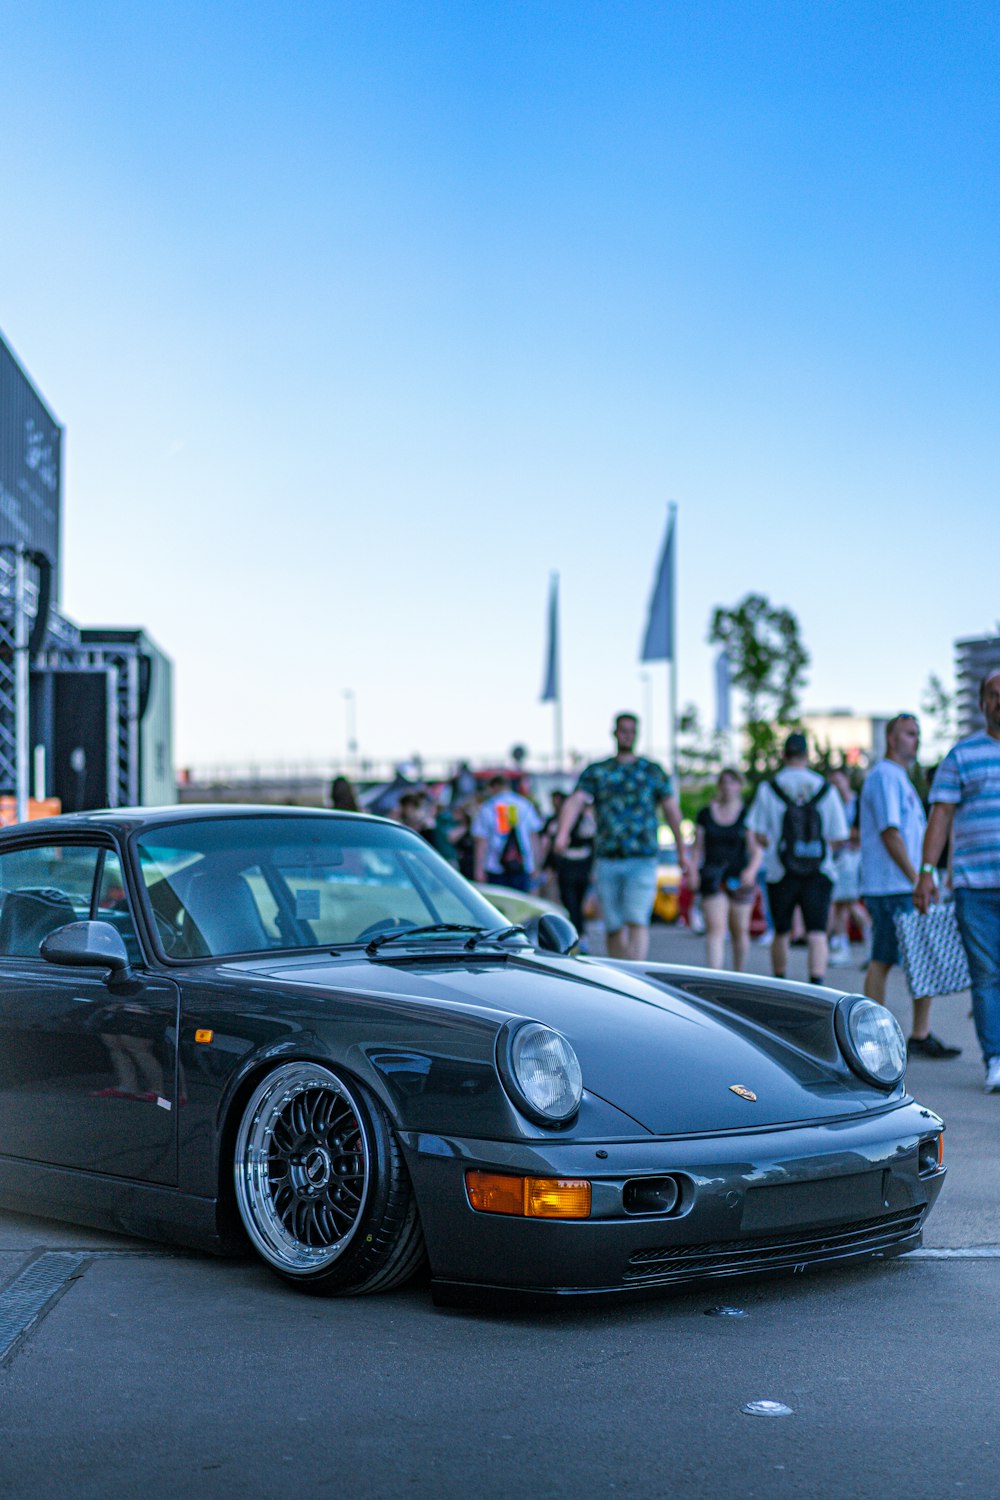 a black porsche parked in front of a crowd of people